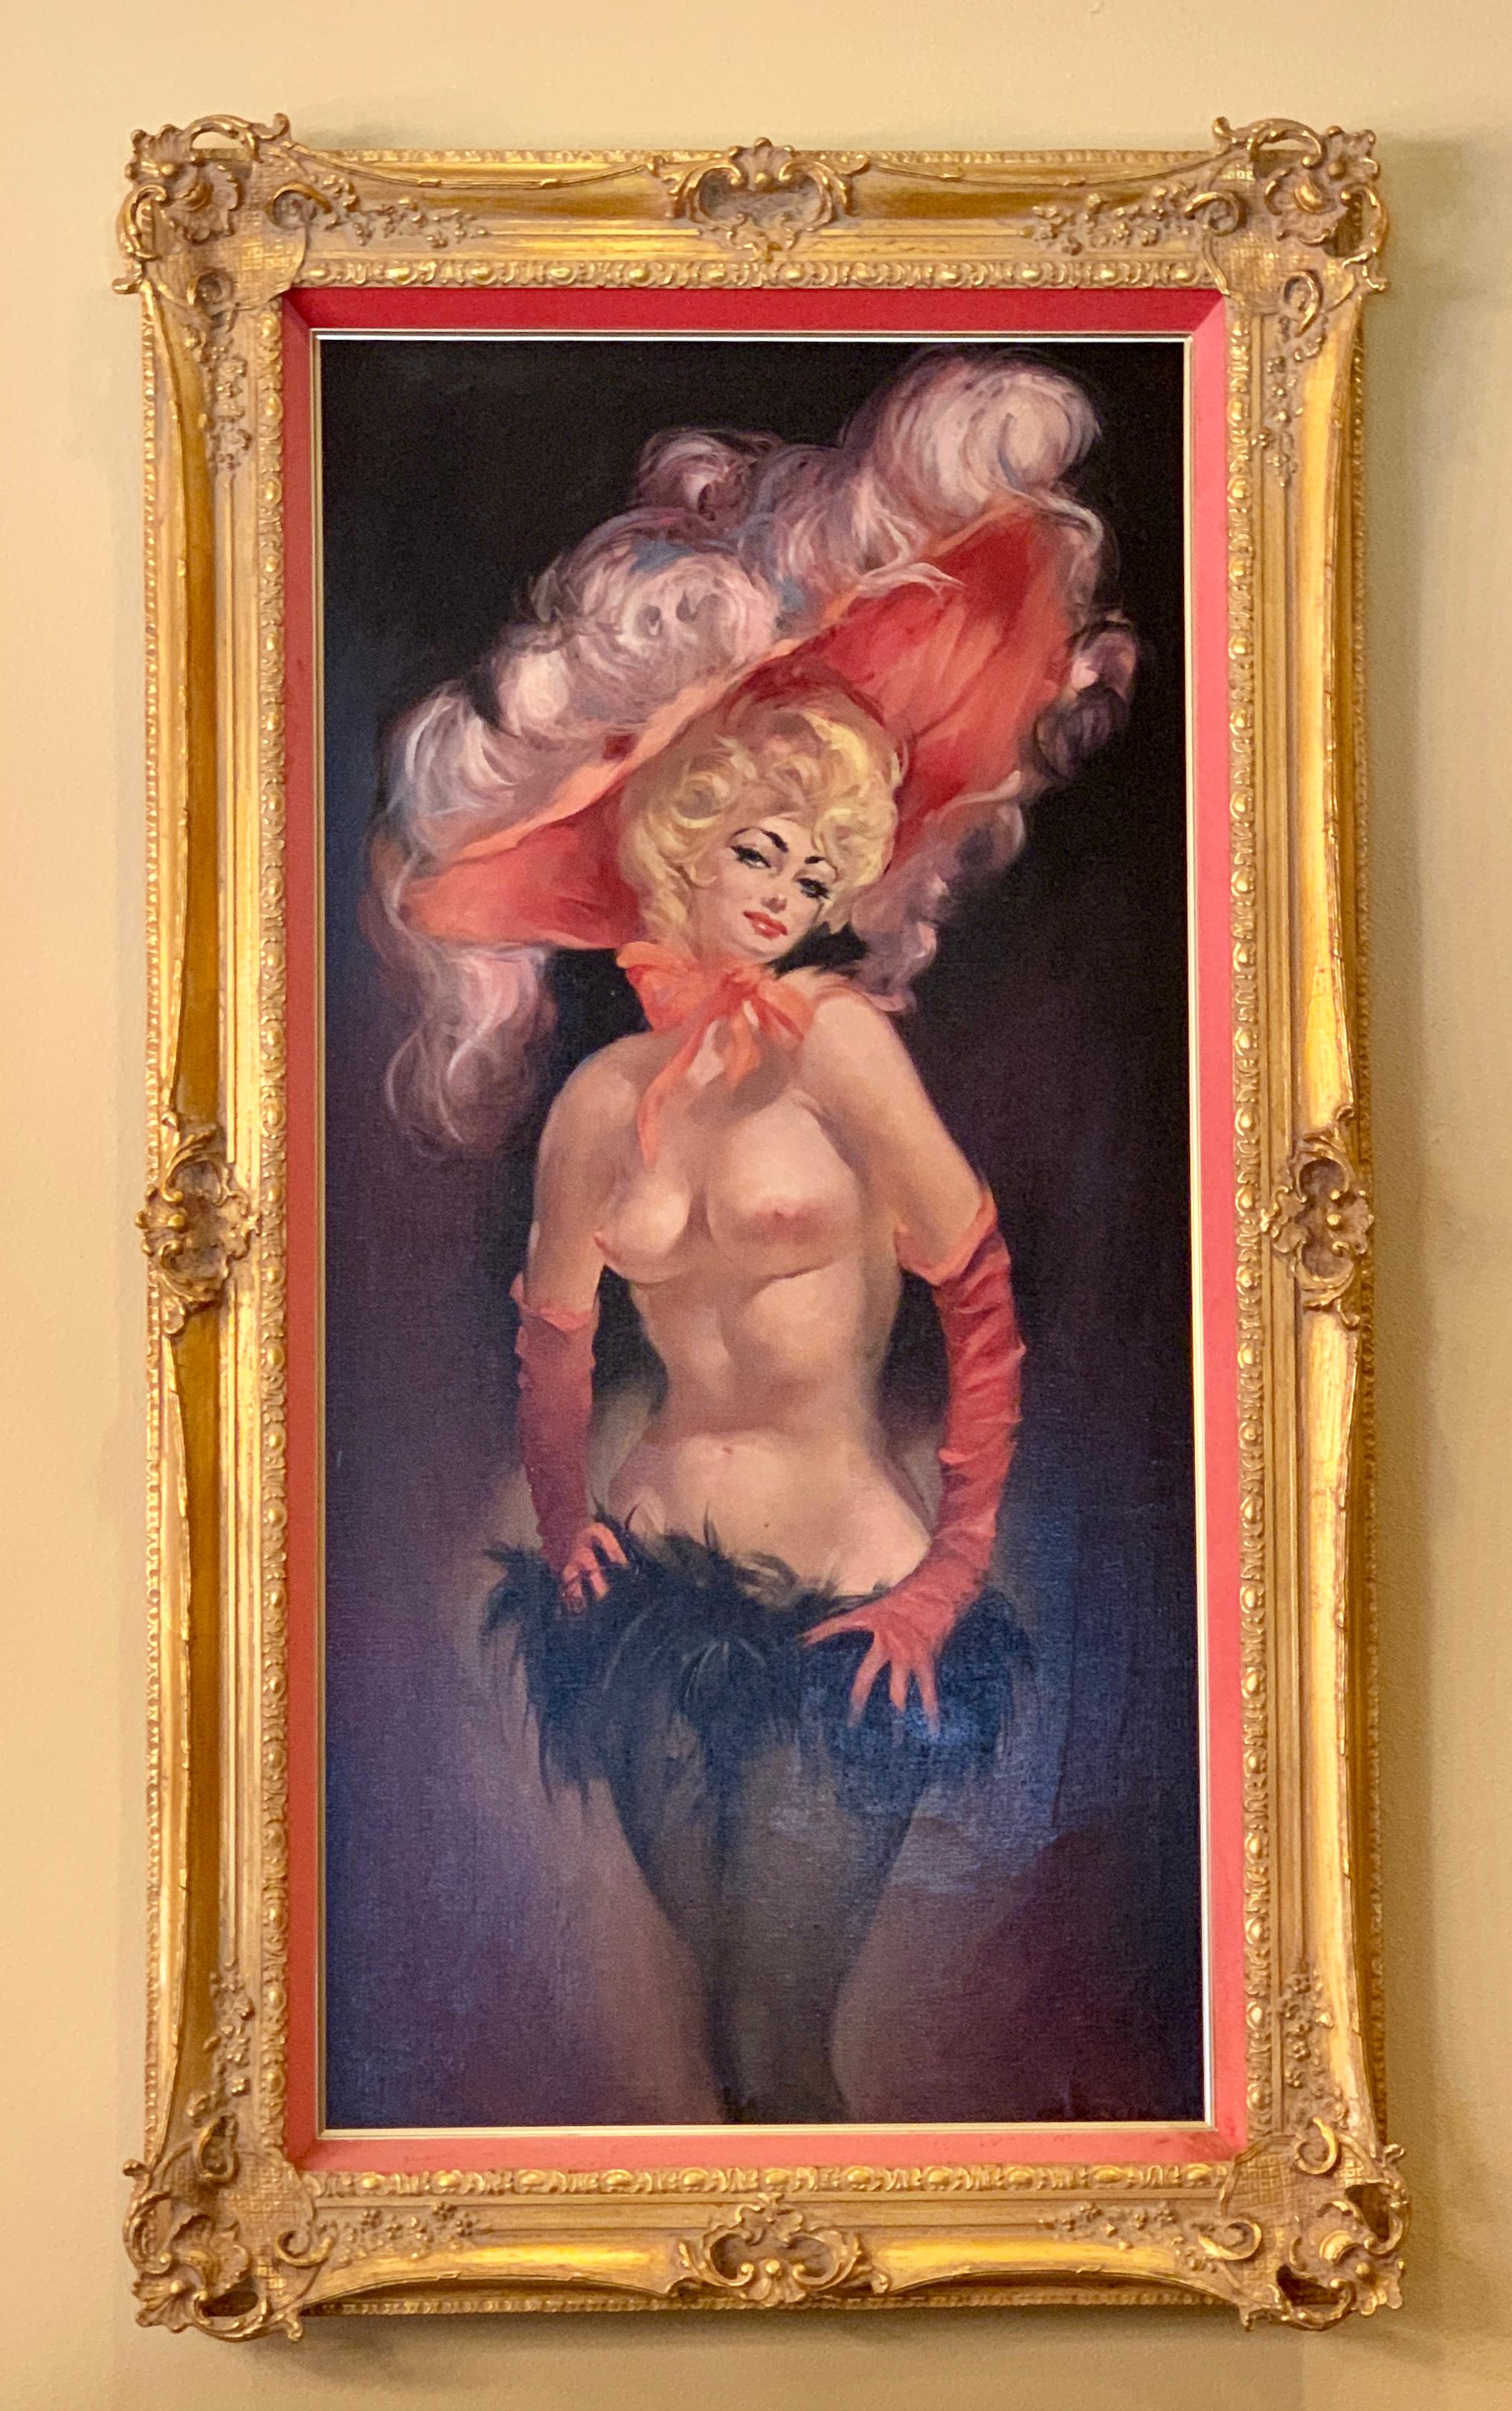 Lush and seductive original oil on Masonite estate painting from the mid twentieth century by famous listed, deceased American painter Julian Ritter (1909-2000). Painting depicts a bold and beautiful sexy blond haired showgirl with bare breasts, her